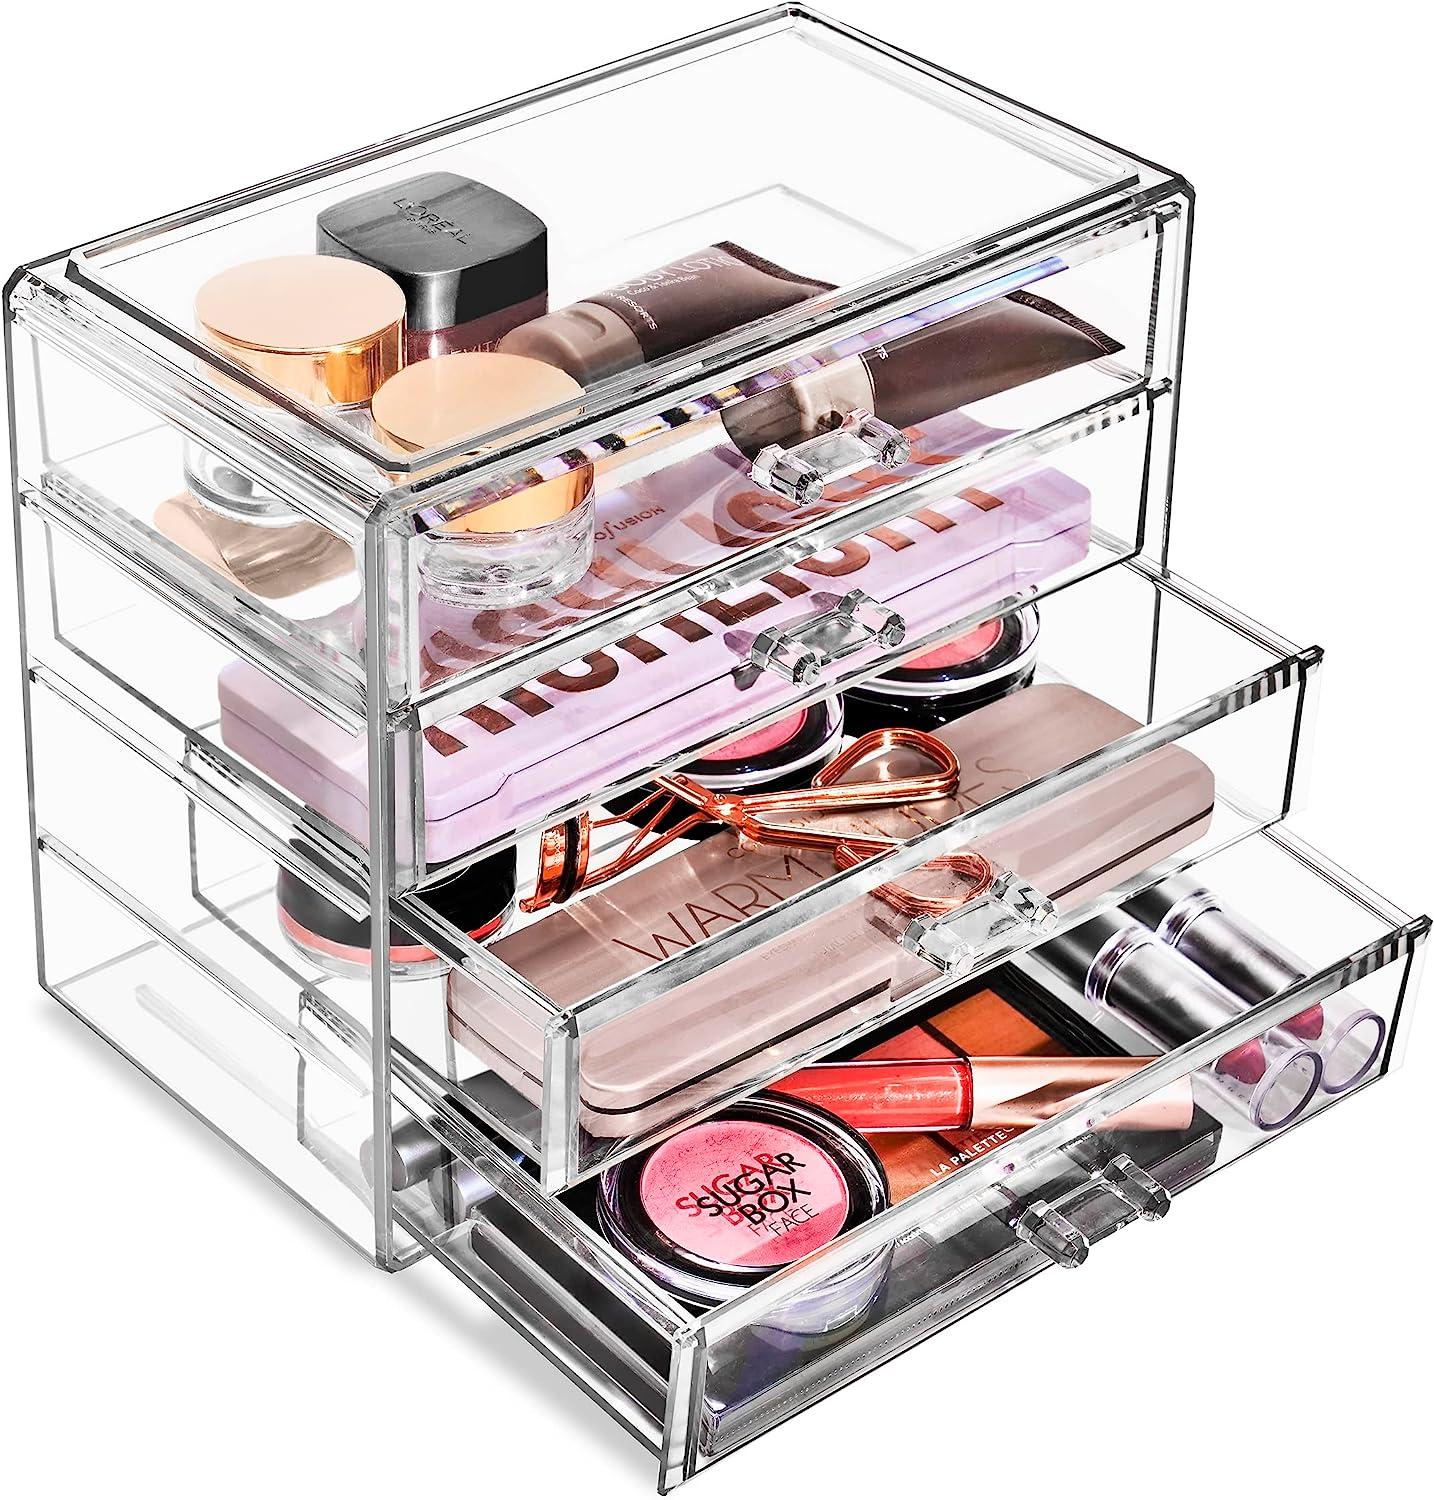 Sorbus Clear Acrylic Drawer Organizer Bins - For Makeup, Jewelry, and more